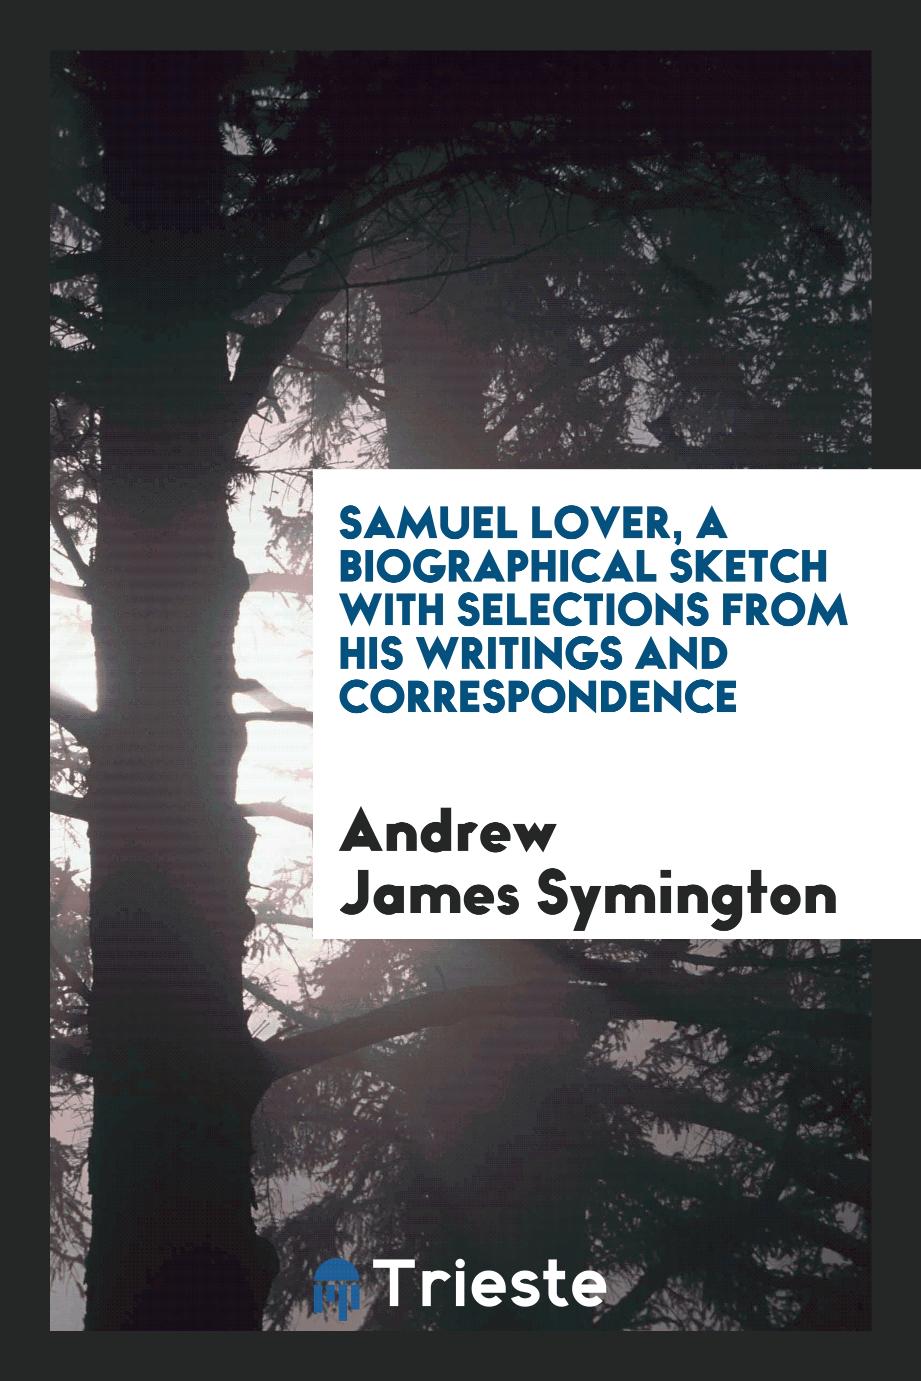 Samuel Lover, a biographical sketch with selections from his writings and correspondence